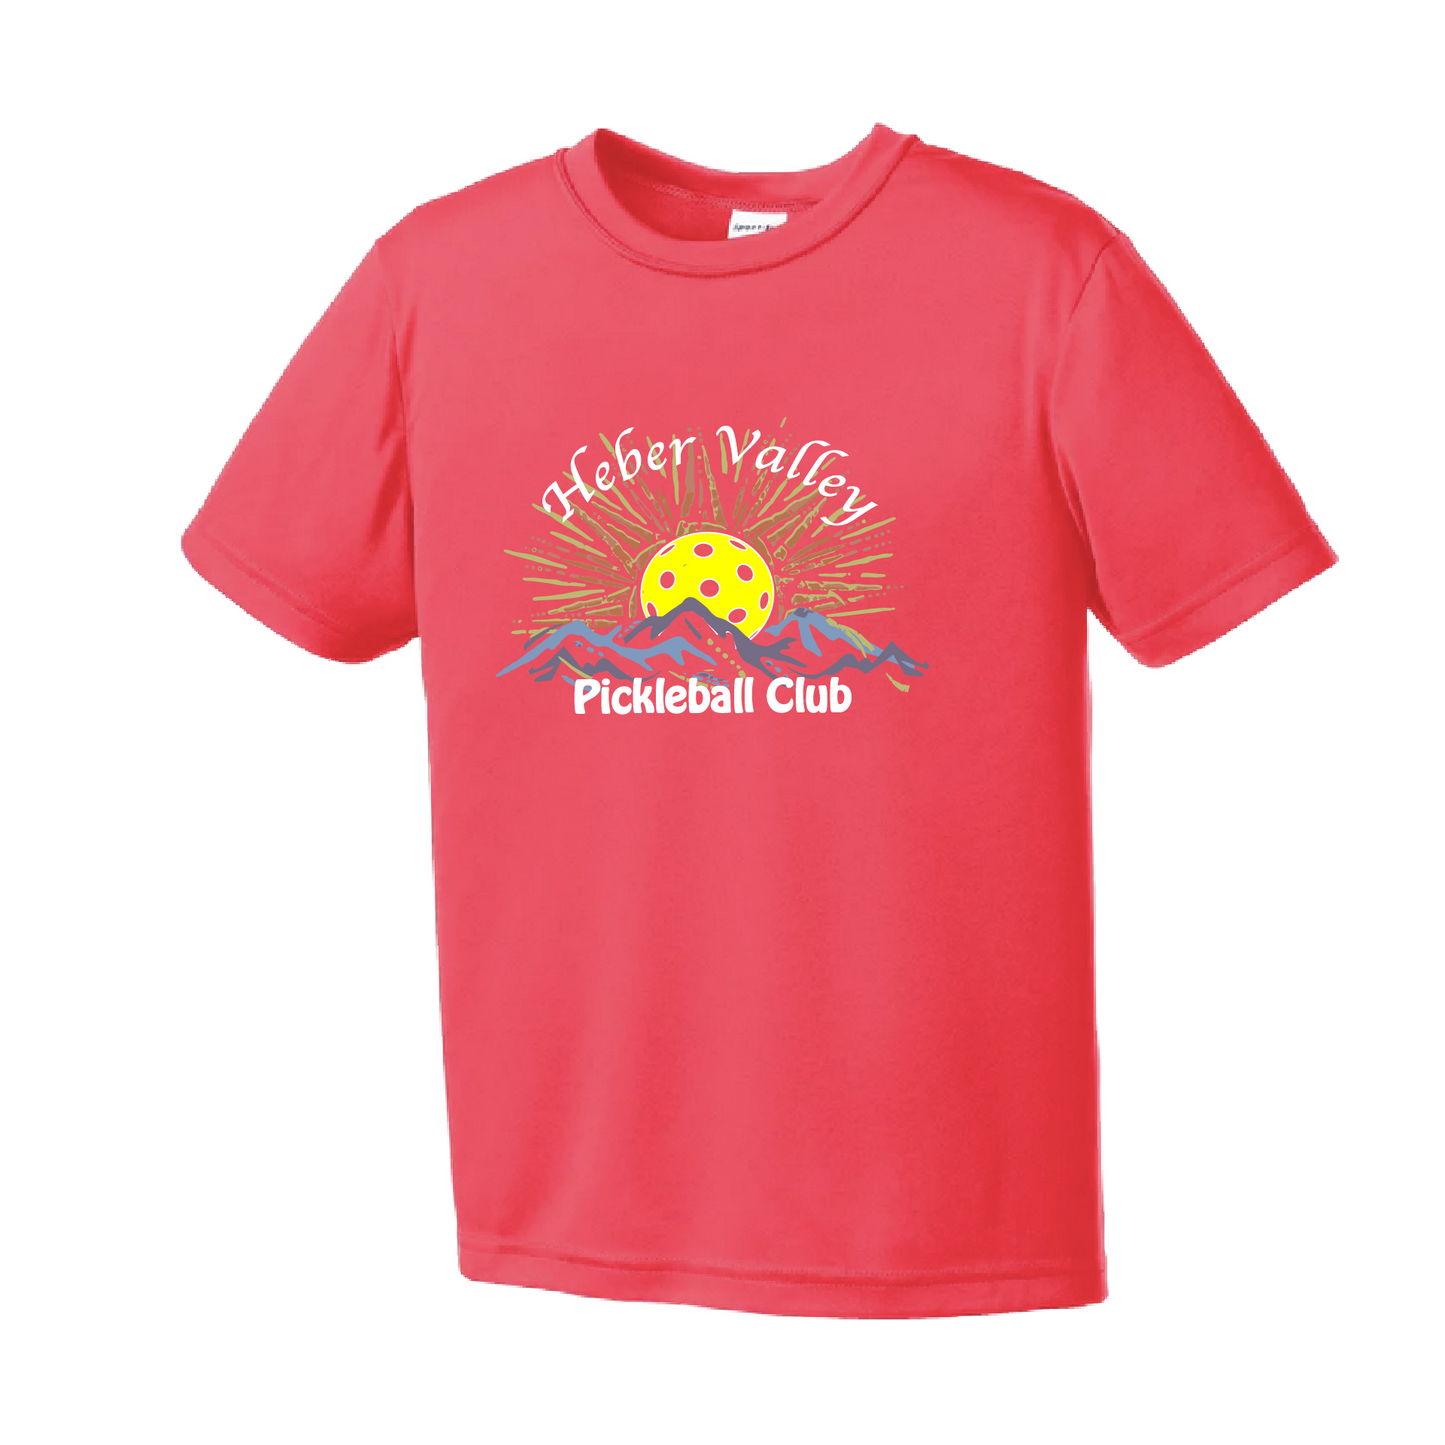 Pickleball Shirt Design: Heber Valley Pickleball Club (Full Design)  Youth Style: Short Sleeve  Shirts are lightweight, roomy and highly breathable. These moisture-wicking shirts are designed for athletic performance. They feature PosiCharge technology to lock in color and prevent logos from fading. Removable tag and set-in sleeves for comfort.